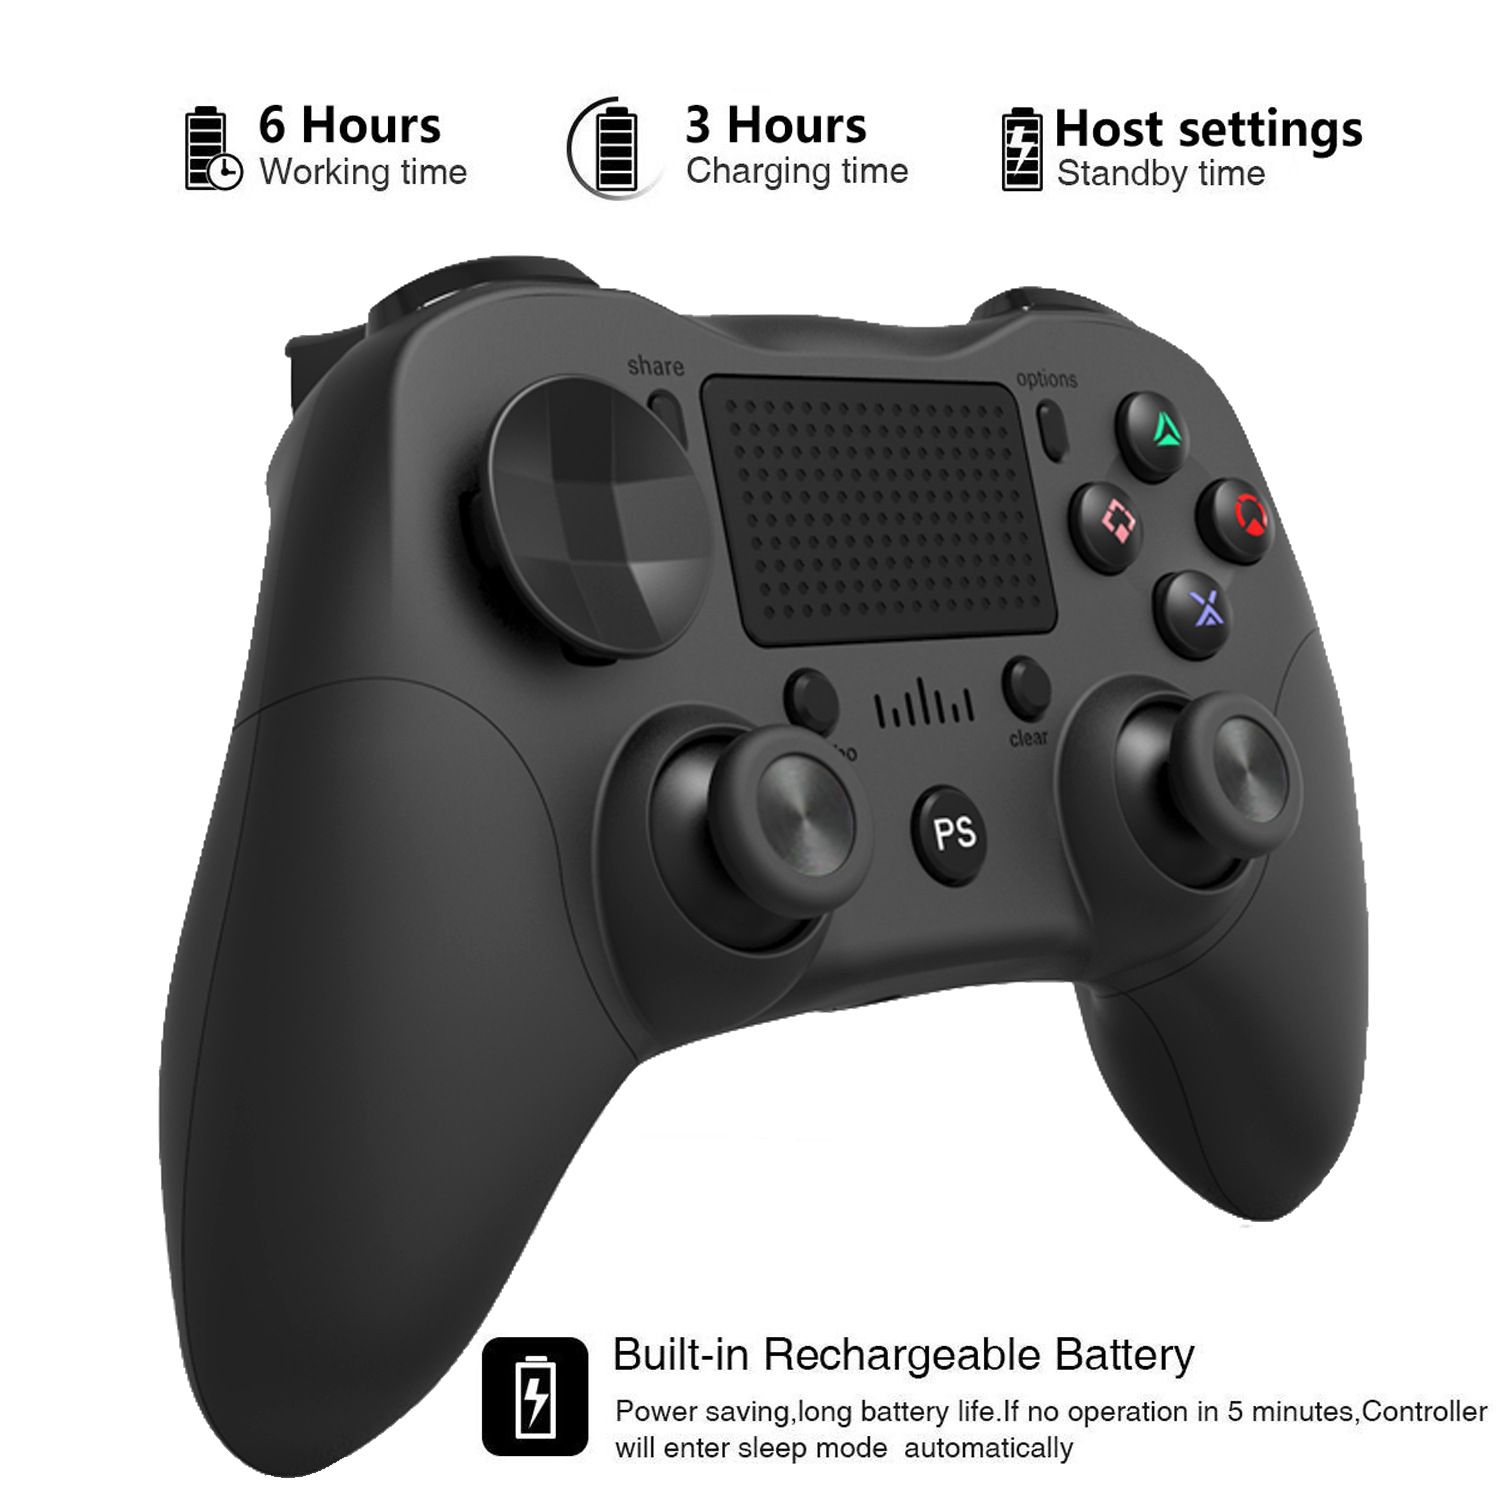 bluetooth-40-Wireless-Game-Controller-Six-axis-Somatosensory-Dual-Vibration-Gamepad-for-PS4-Game-Con-1661733